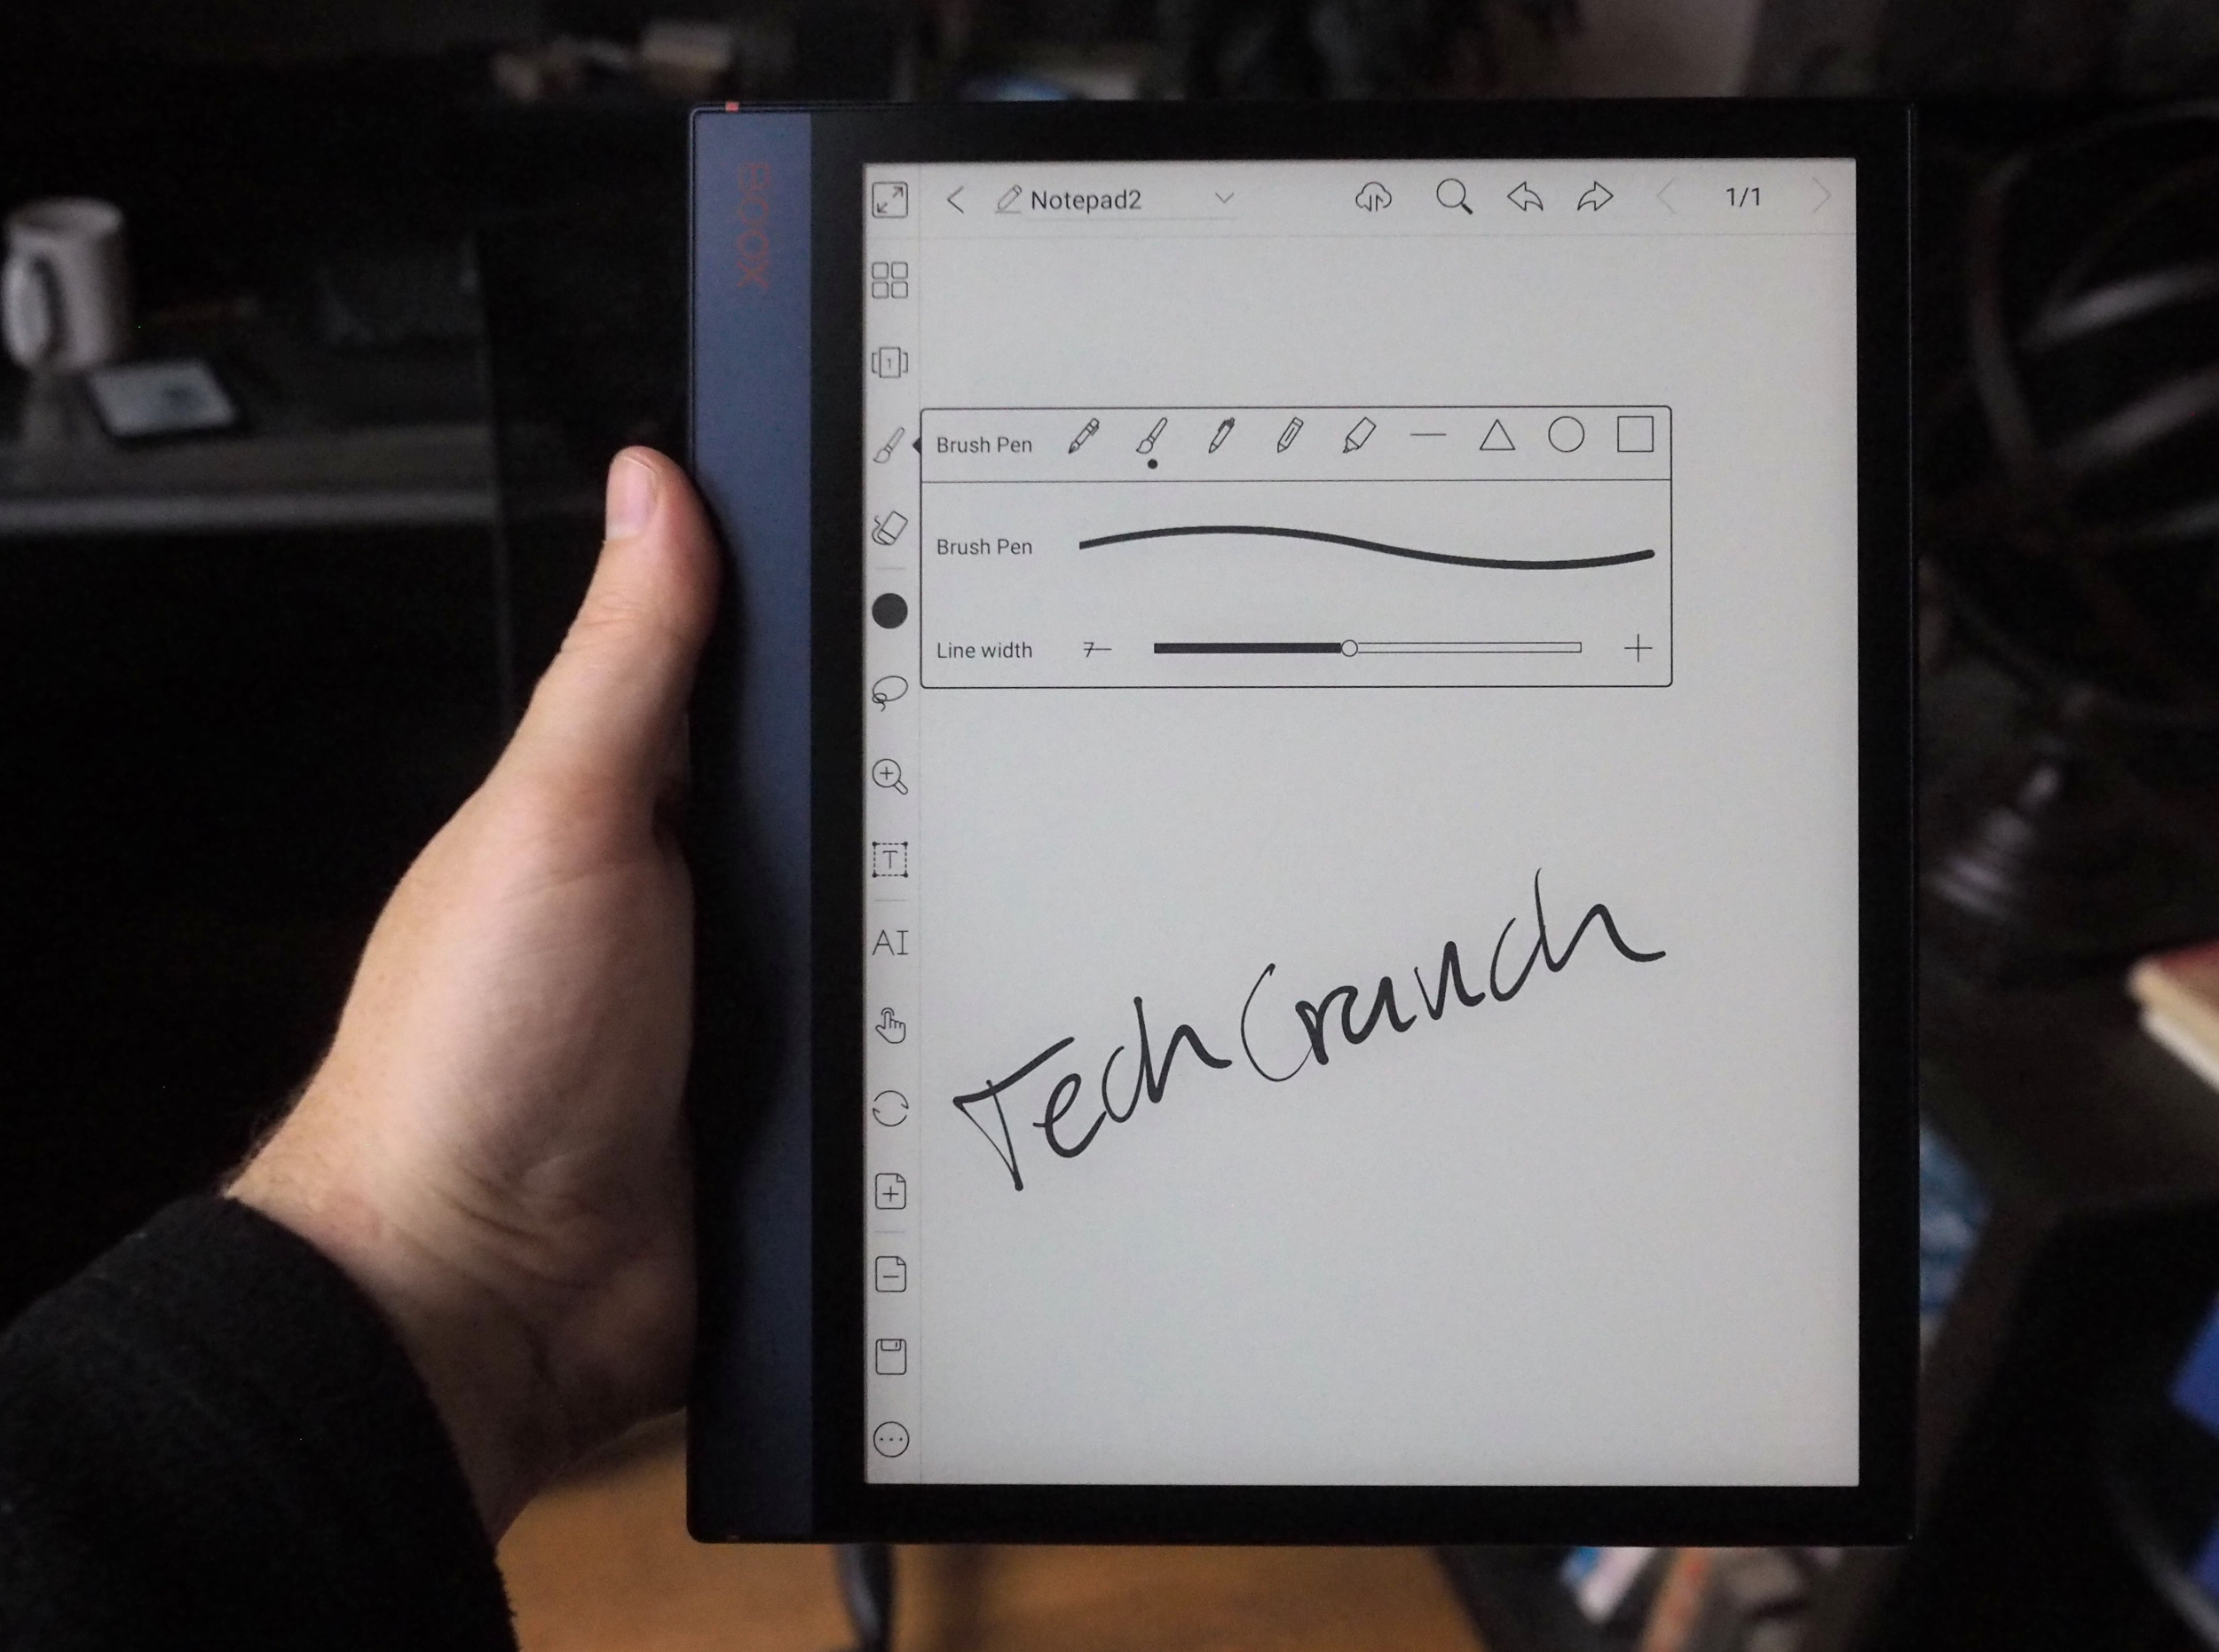 View of a tablet interface with handwriting on it.